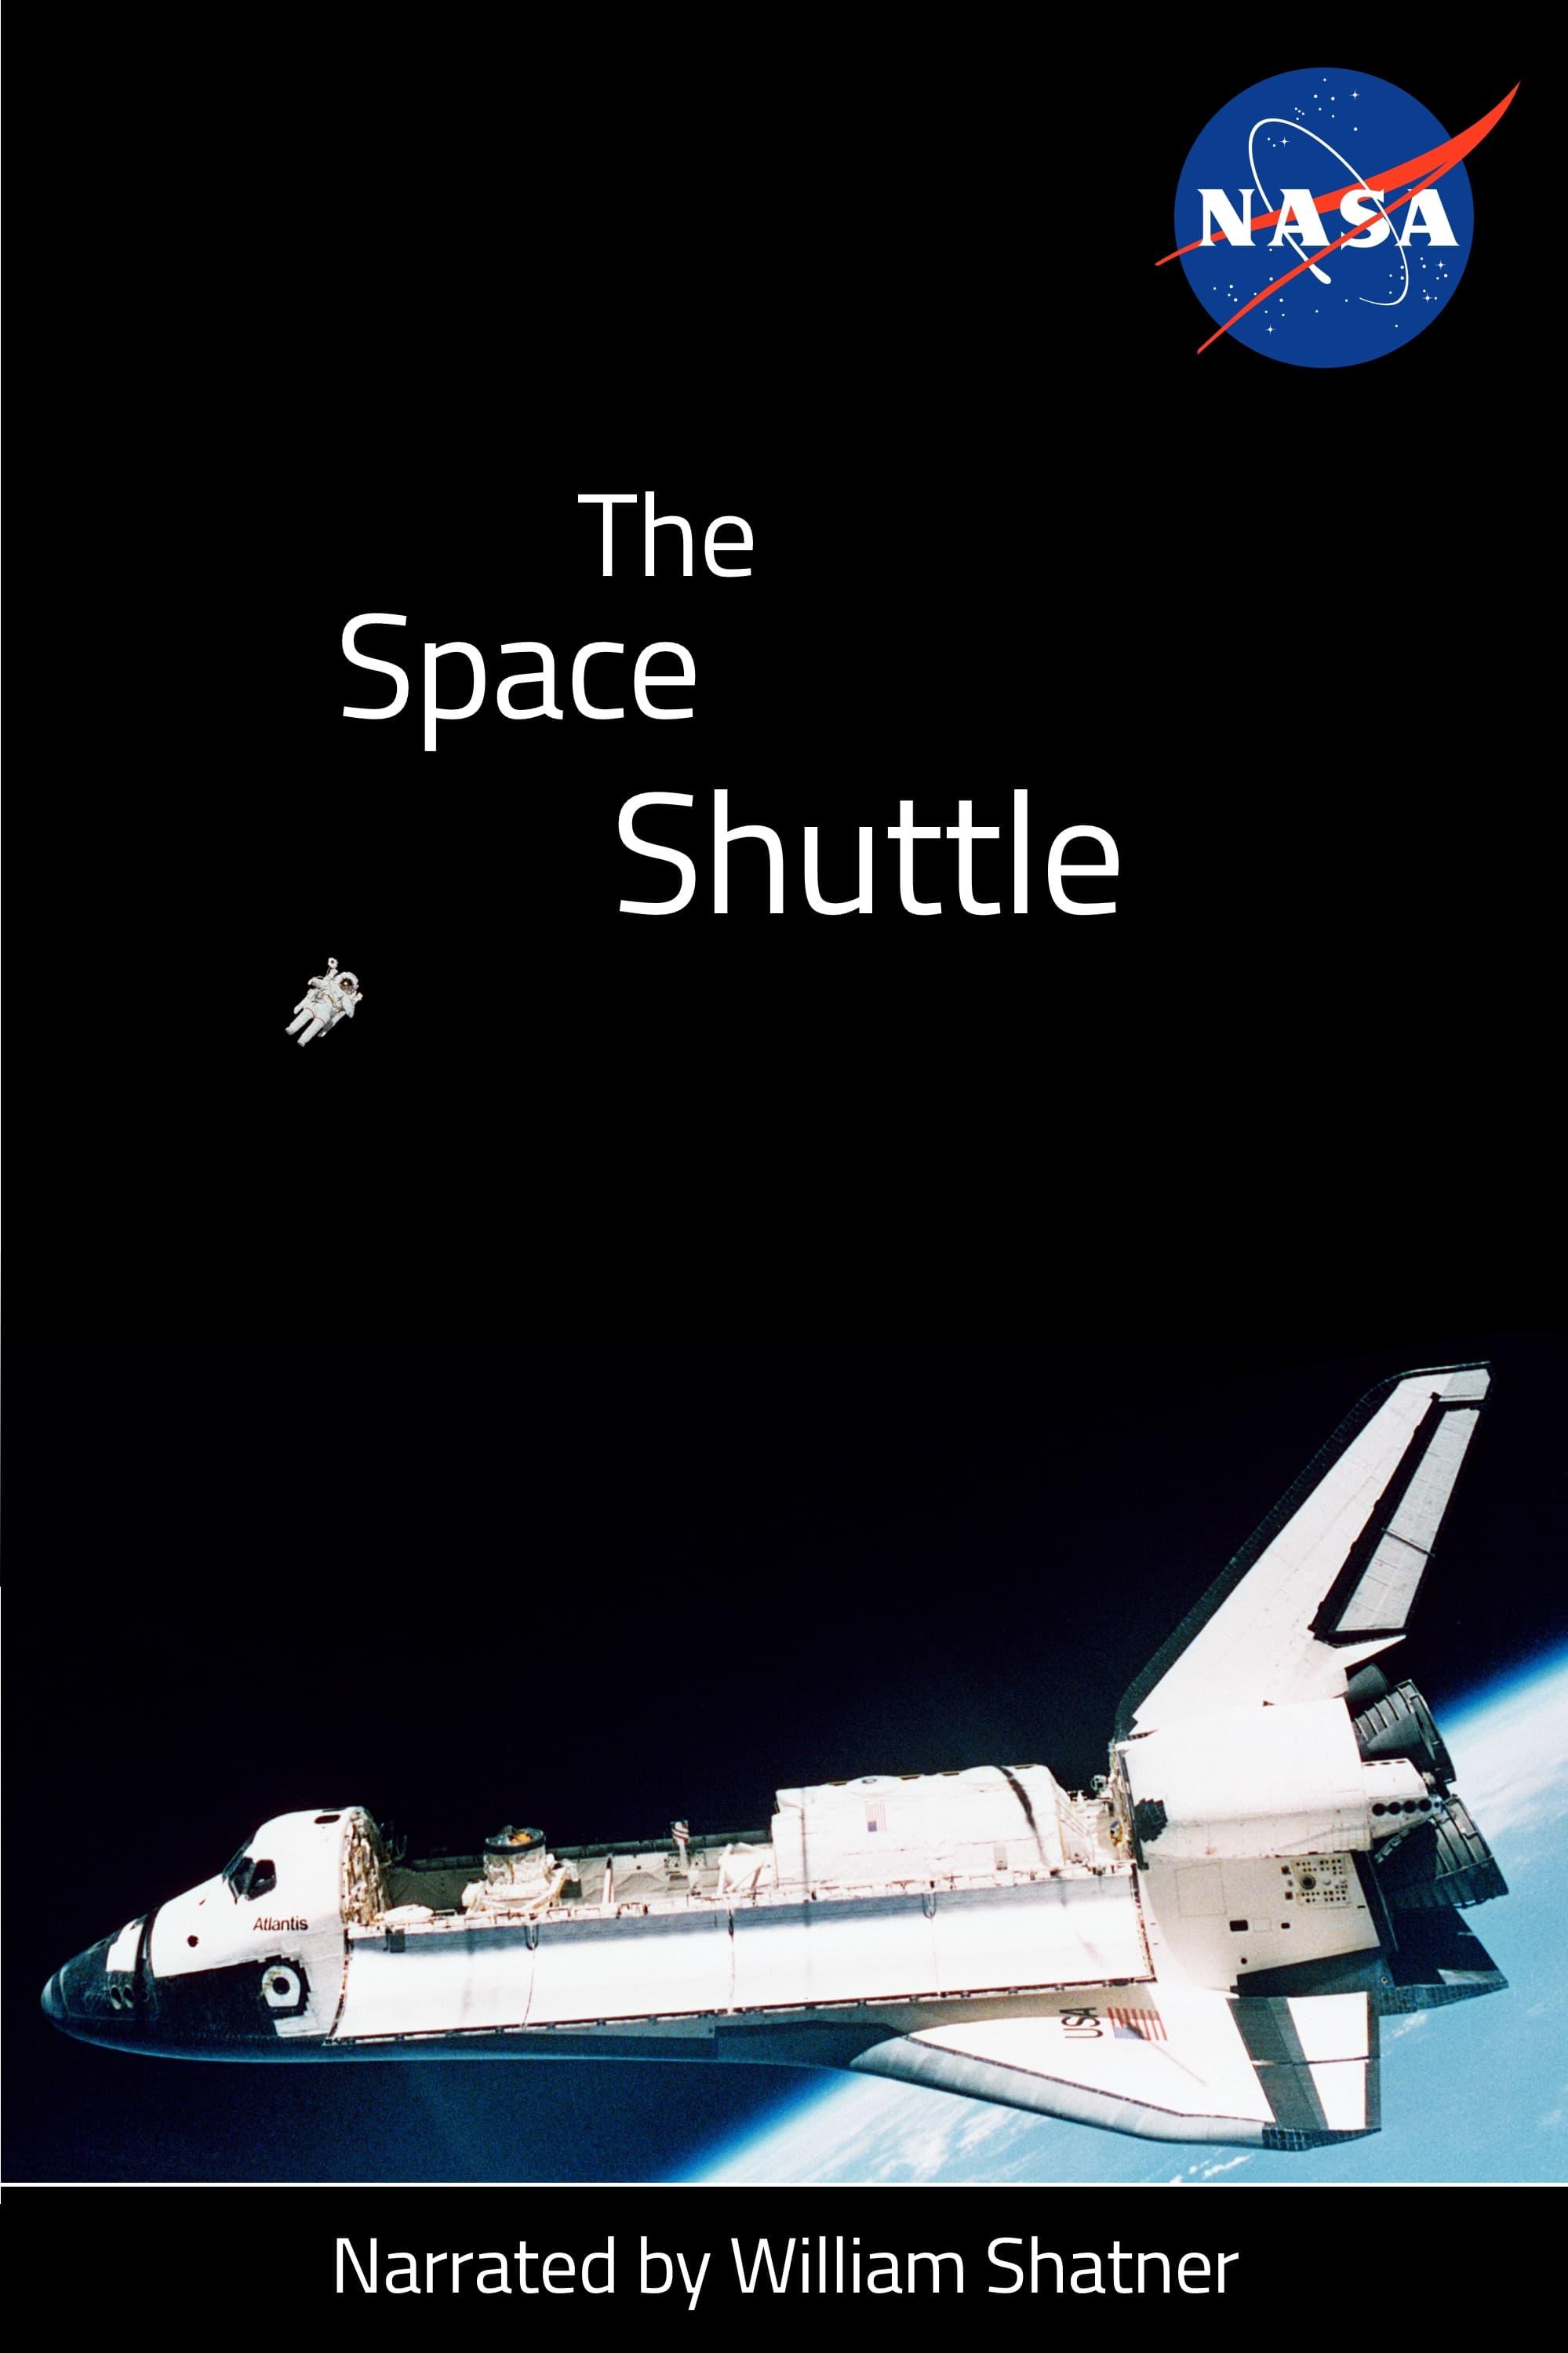 The Space Shuttle poster